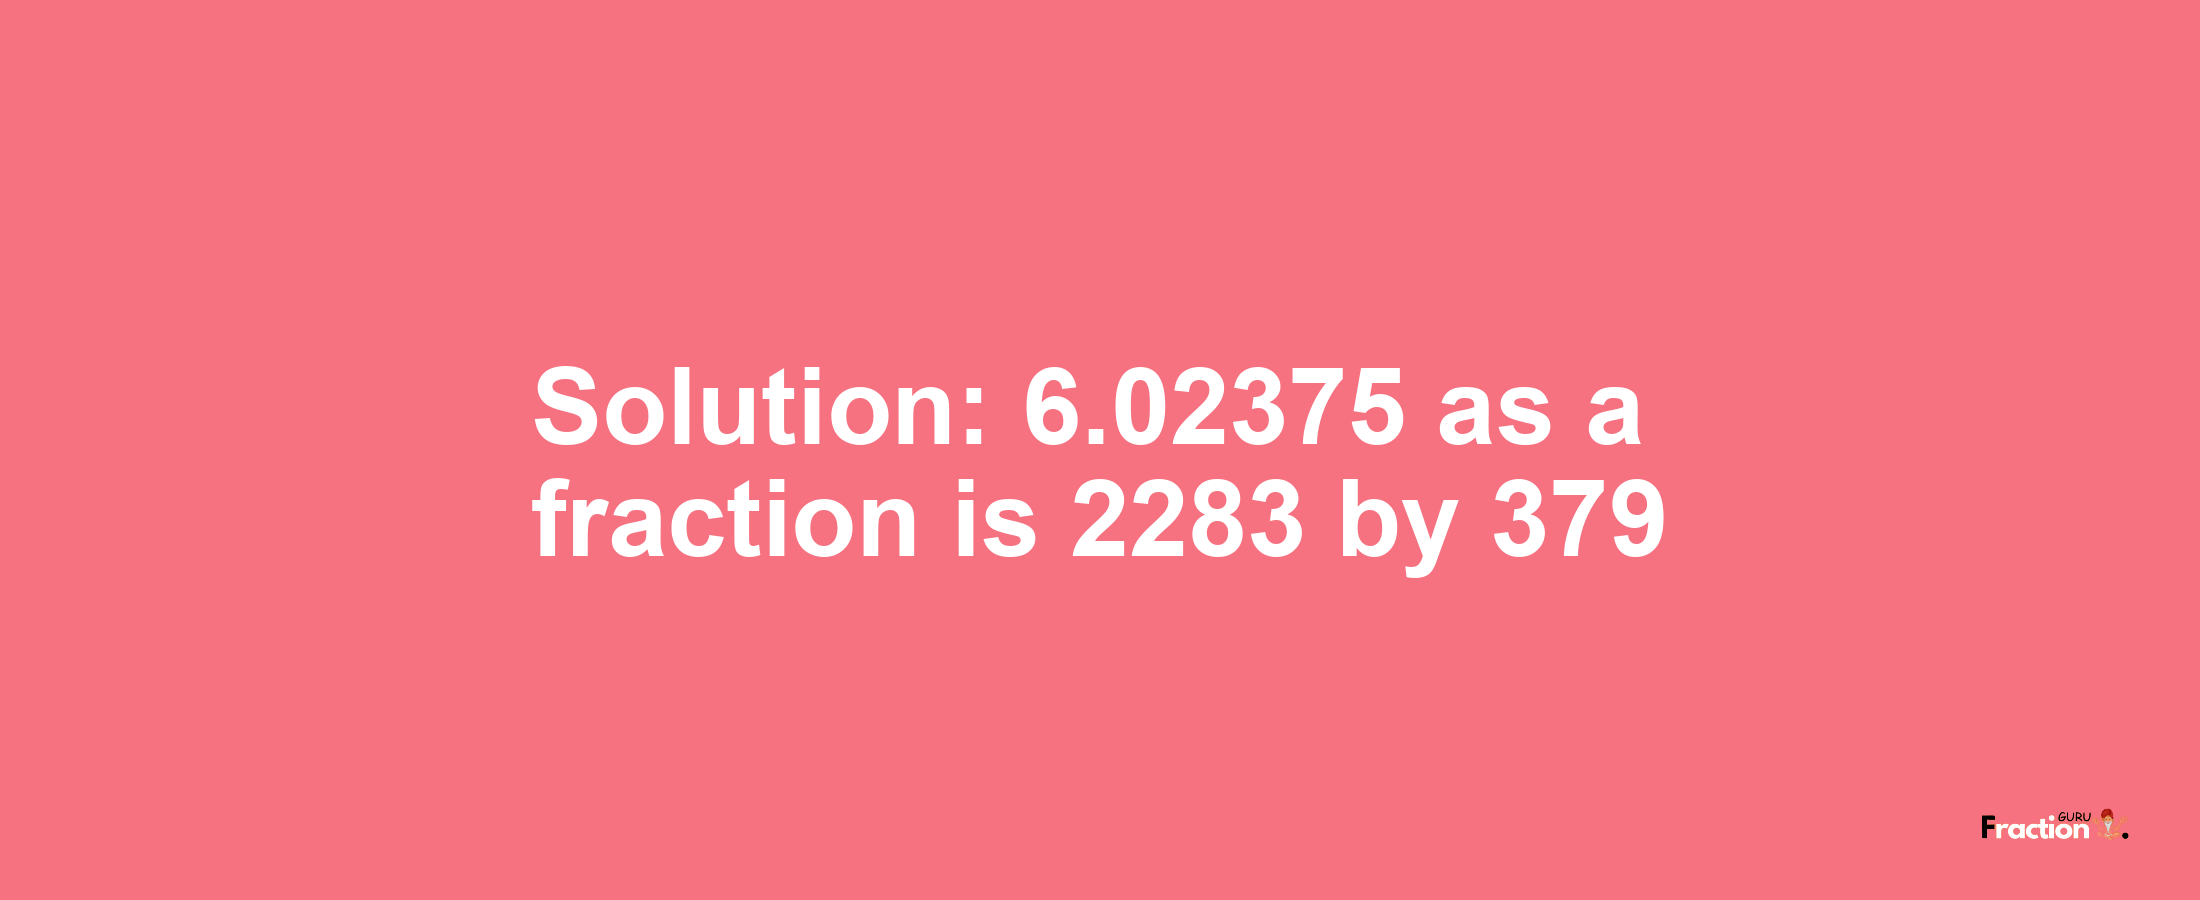 Solution:6.02375 as a fraction is 2283/379